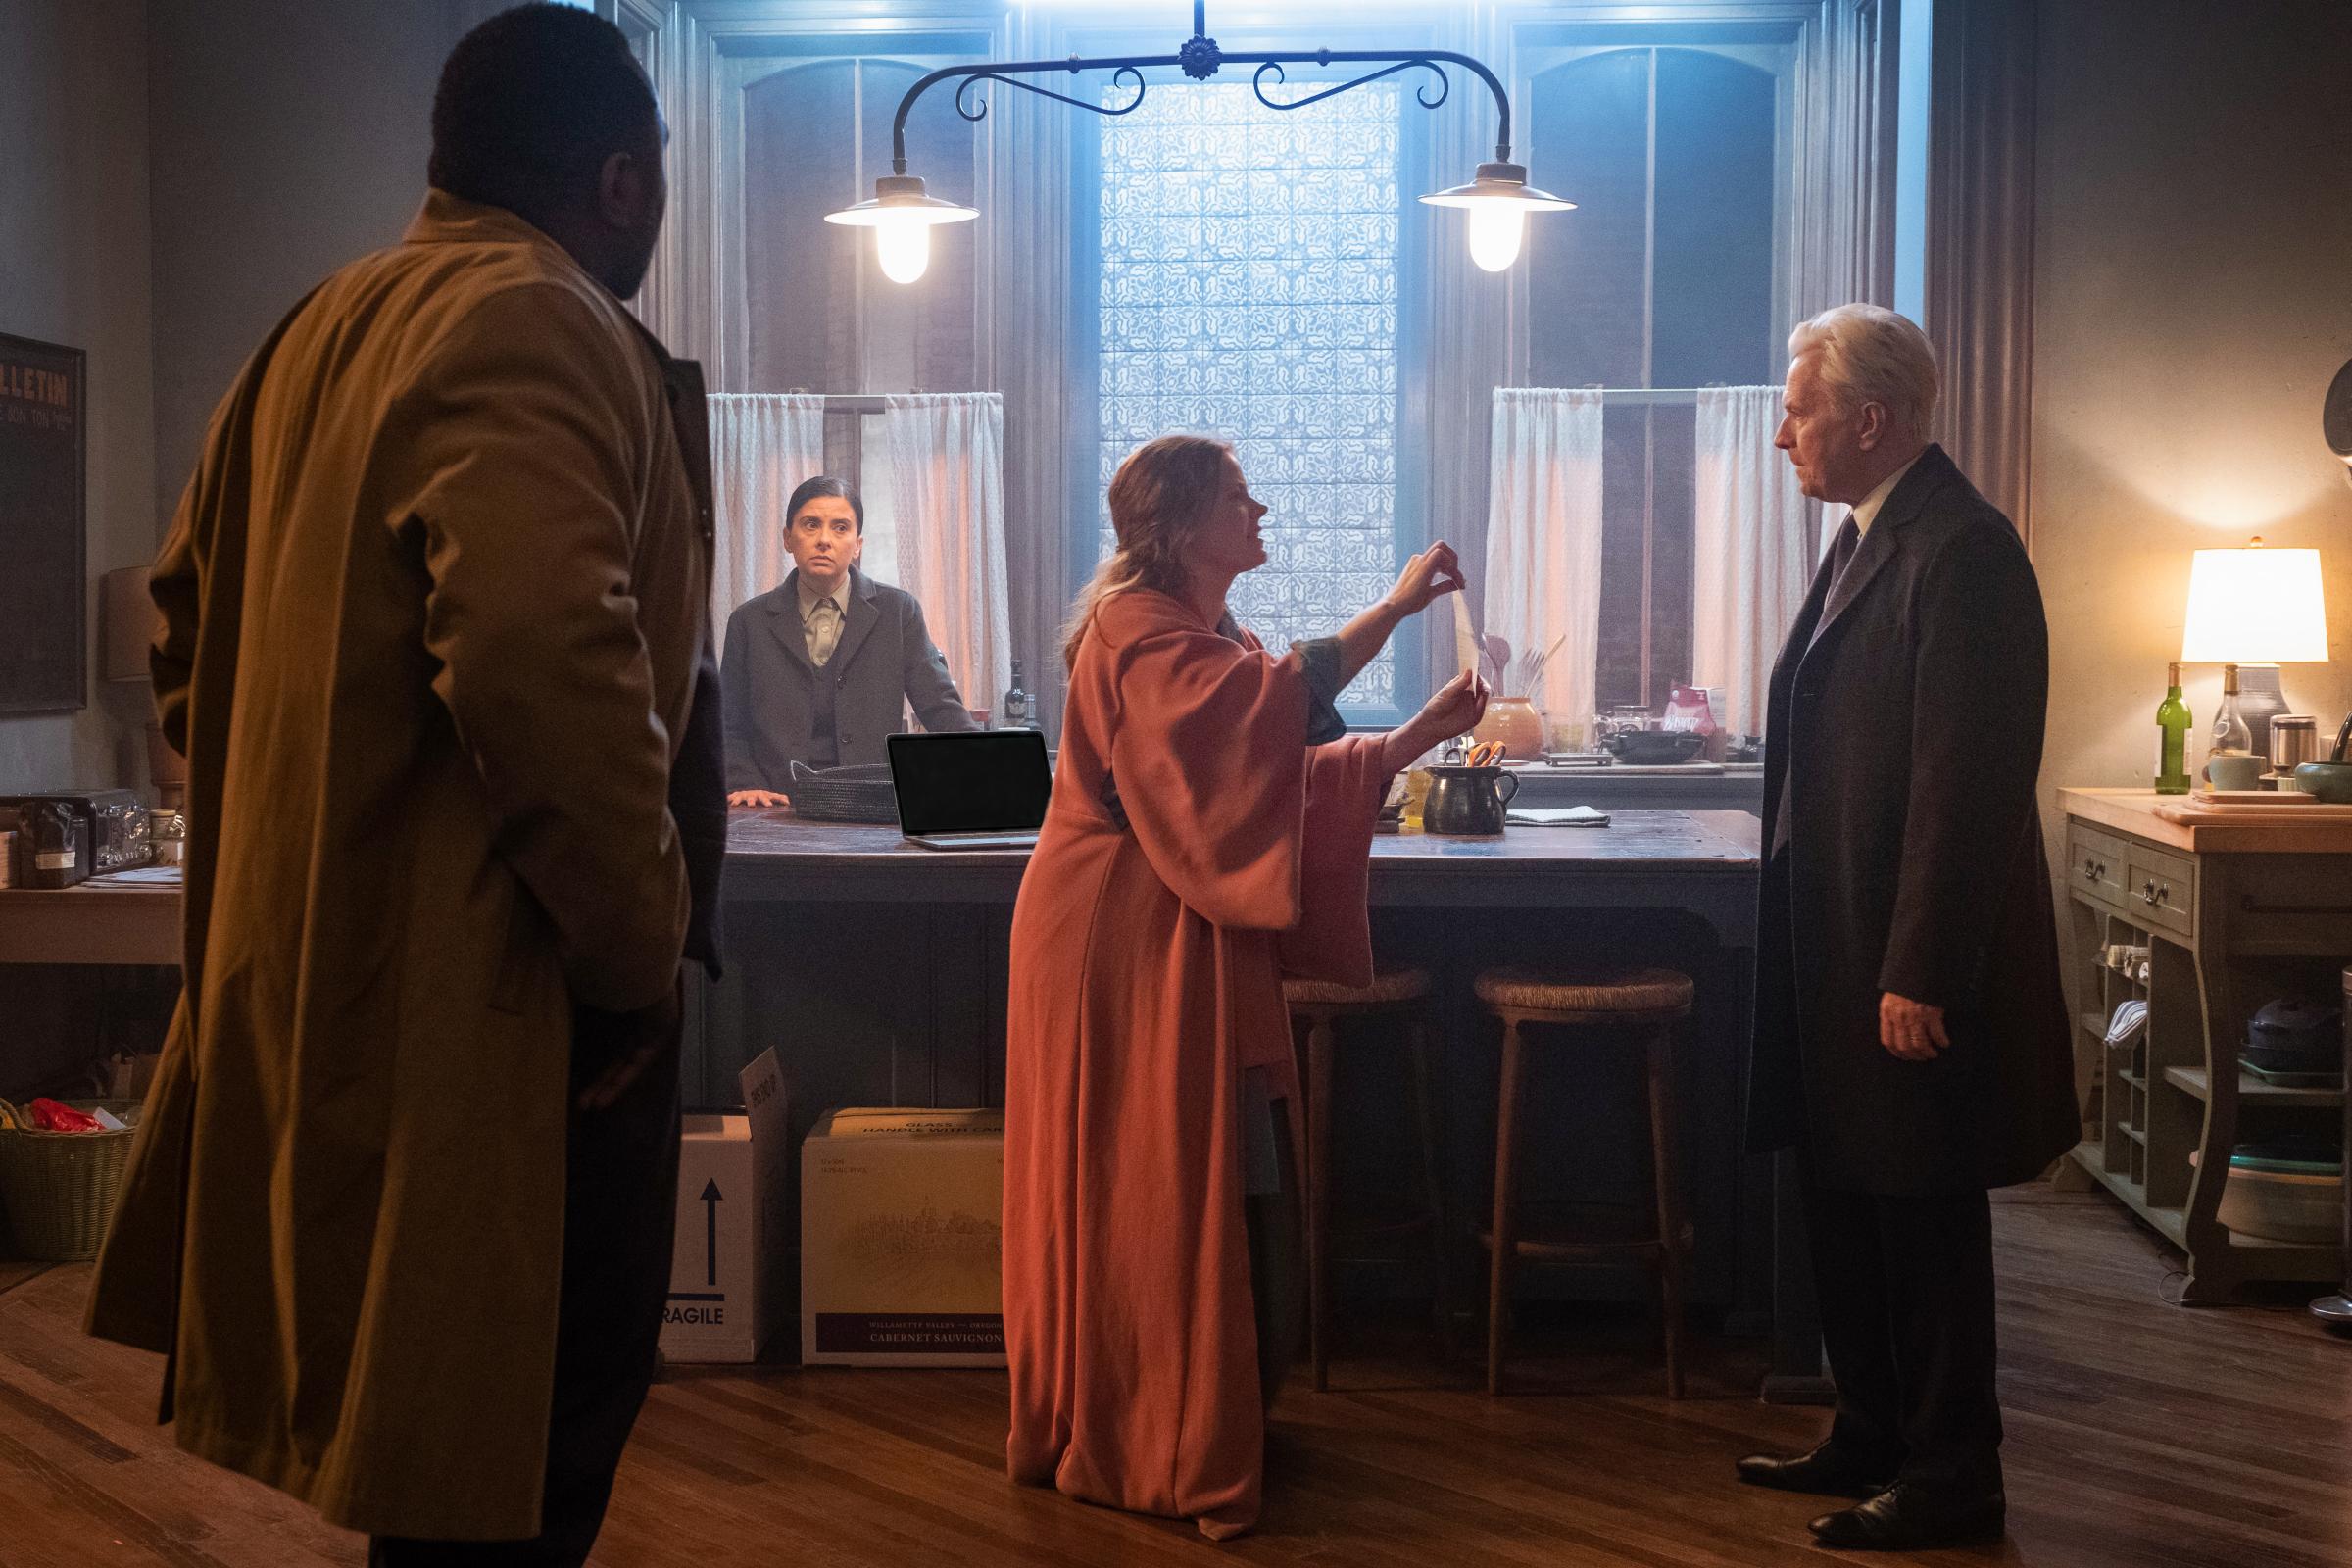 Woman in the Window (2021), L to R: Brian Tyree Henry as Detective Little, Jeanine Serralles as Detective Norelli, Amy Adams as Anna Fox, and Gary Oldman as Alistair Russell.